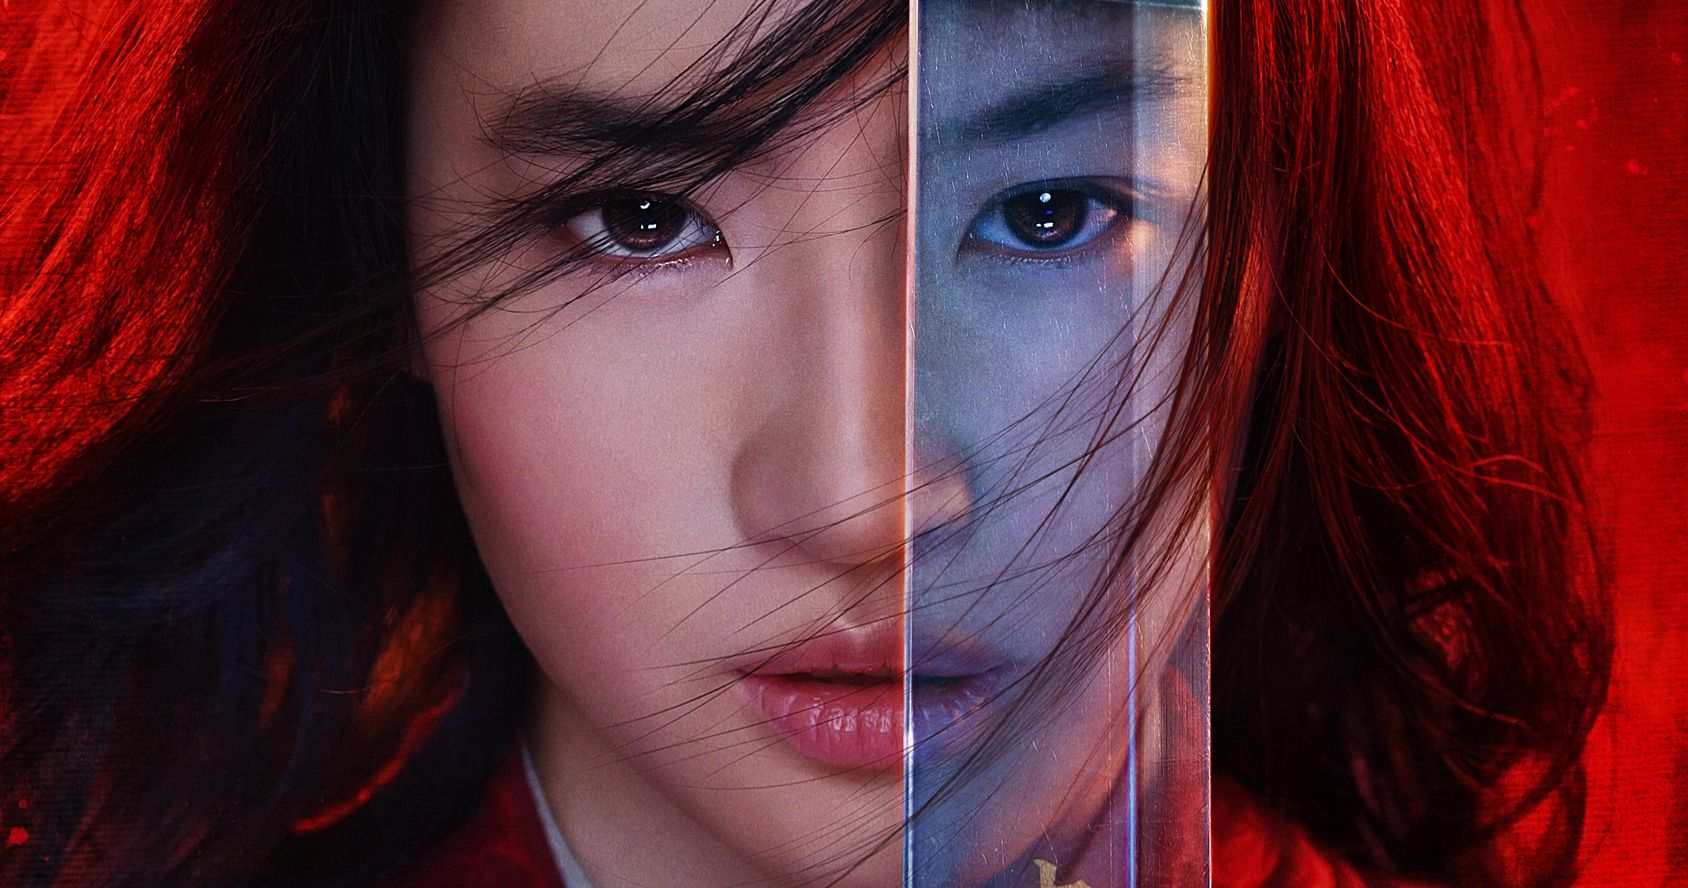 Disney's Mulan Trailer Arrives, Animated Classic Becomes a Live-Action Epic